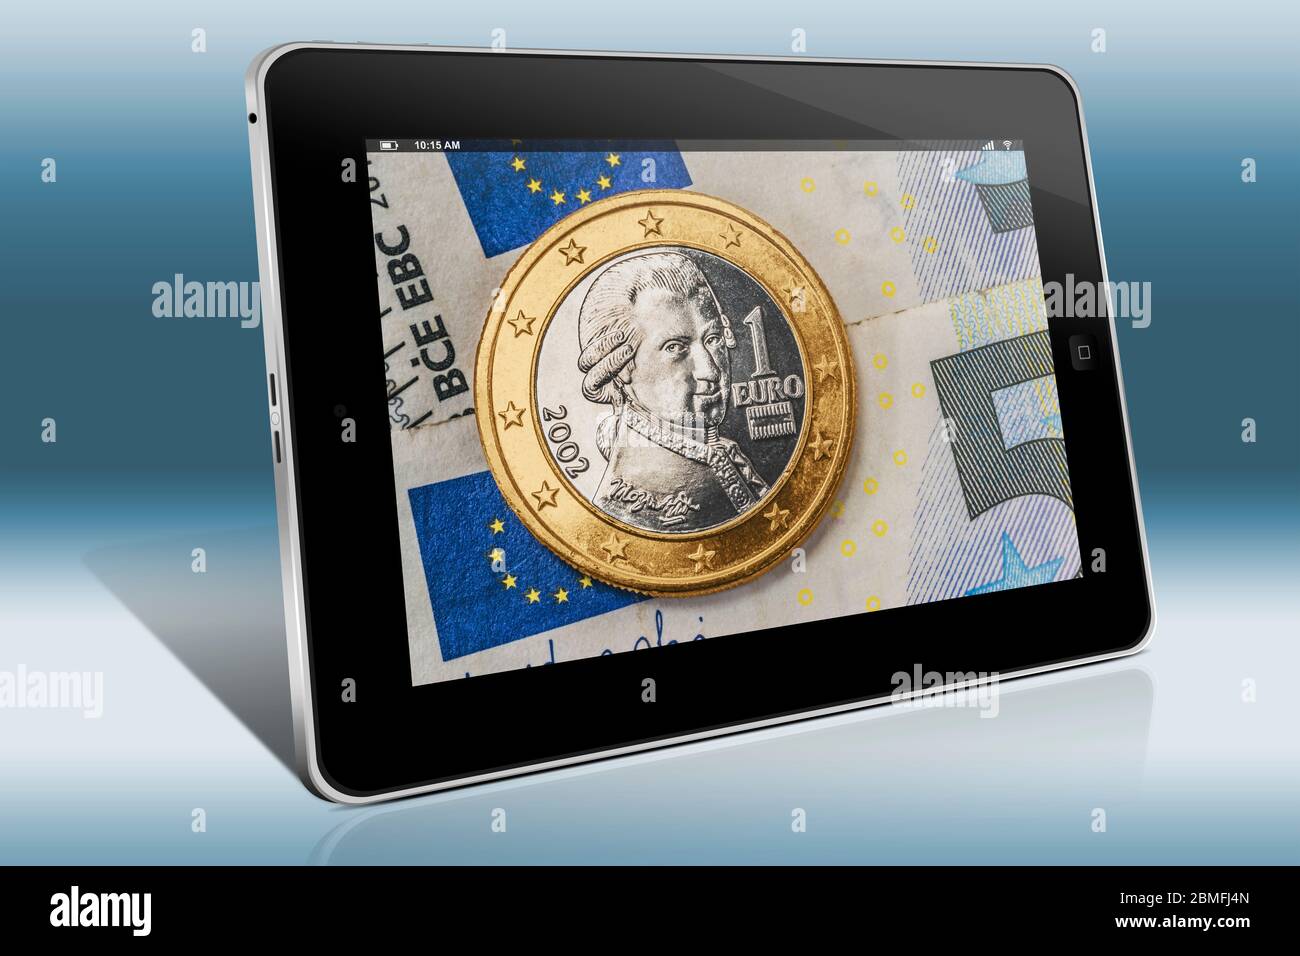 a 1 euro coin from Austria on euro banknotes, view on a Tablet PC Stock Photo